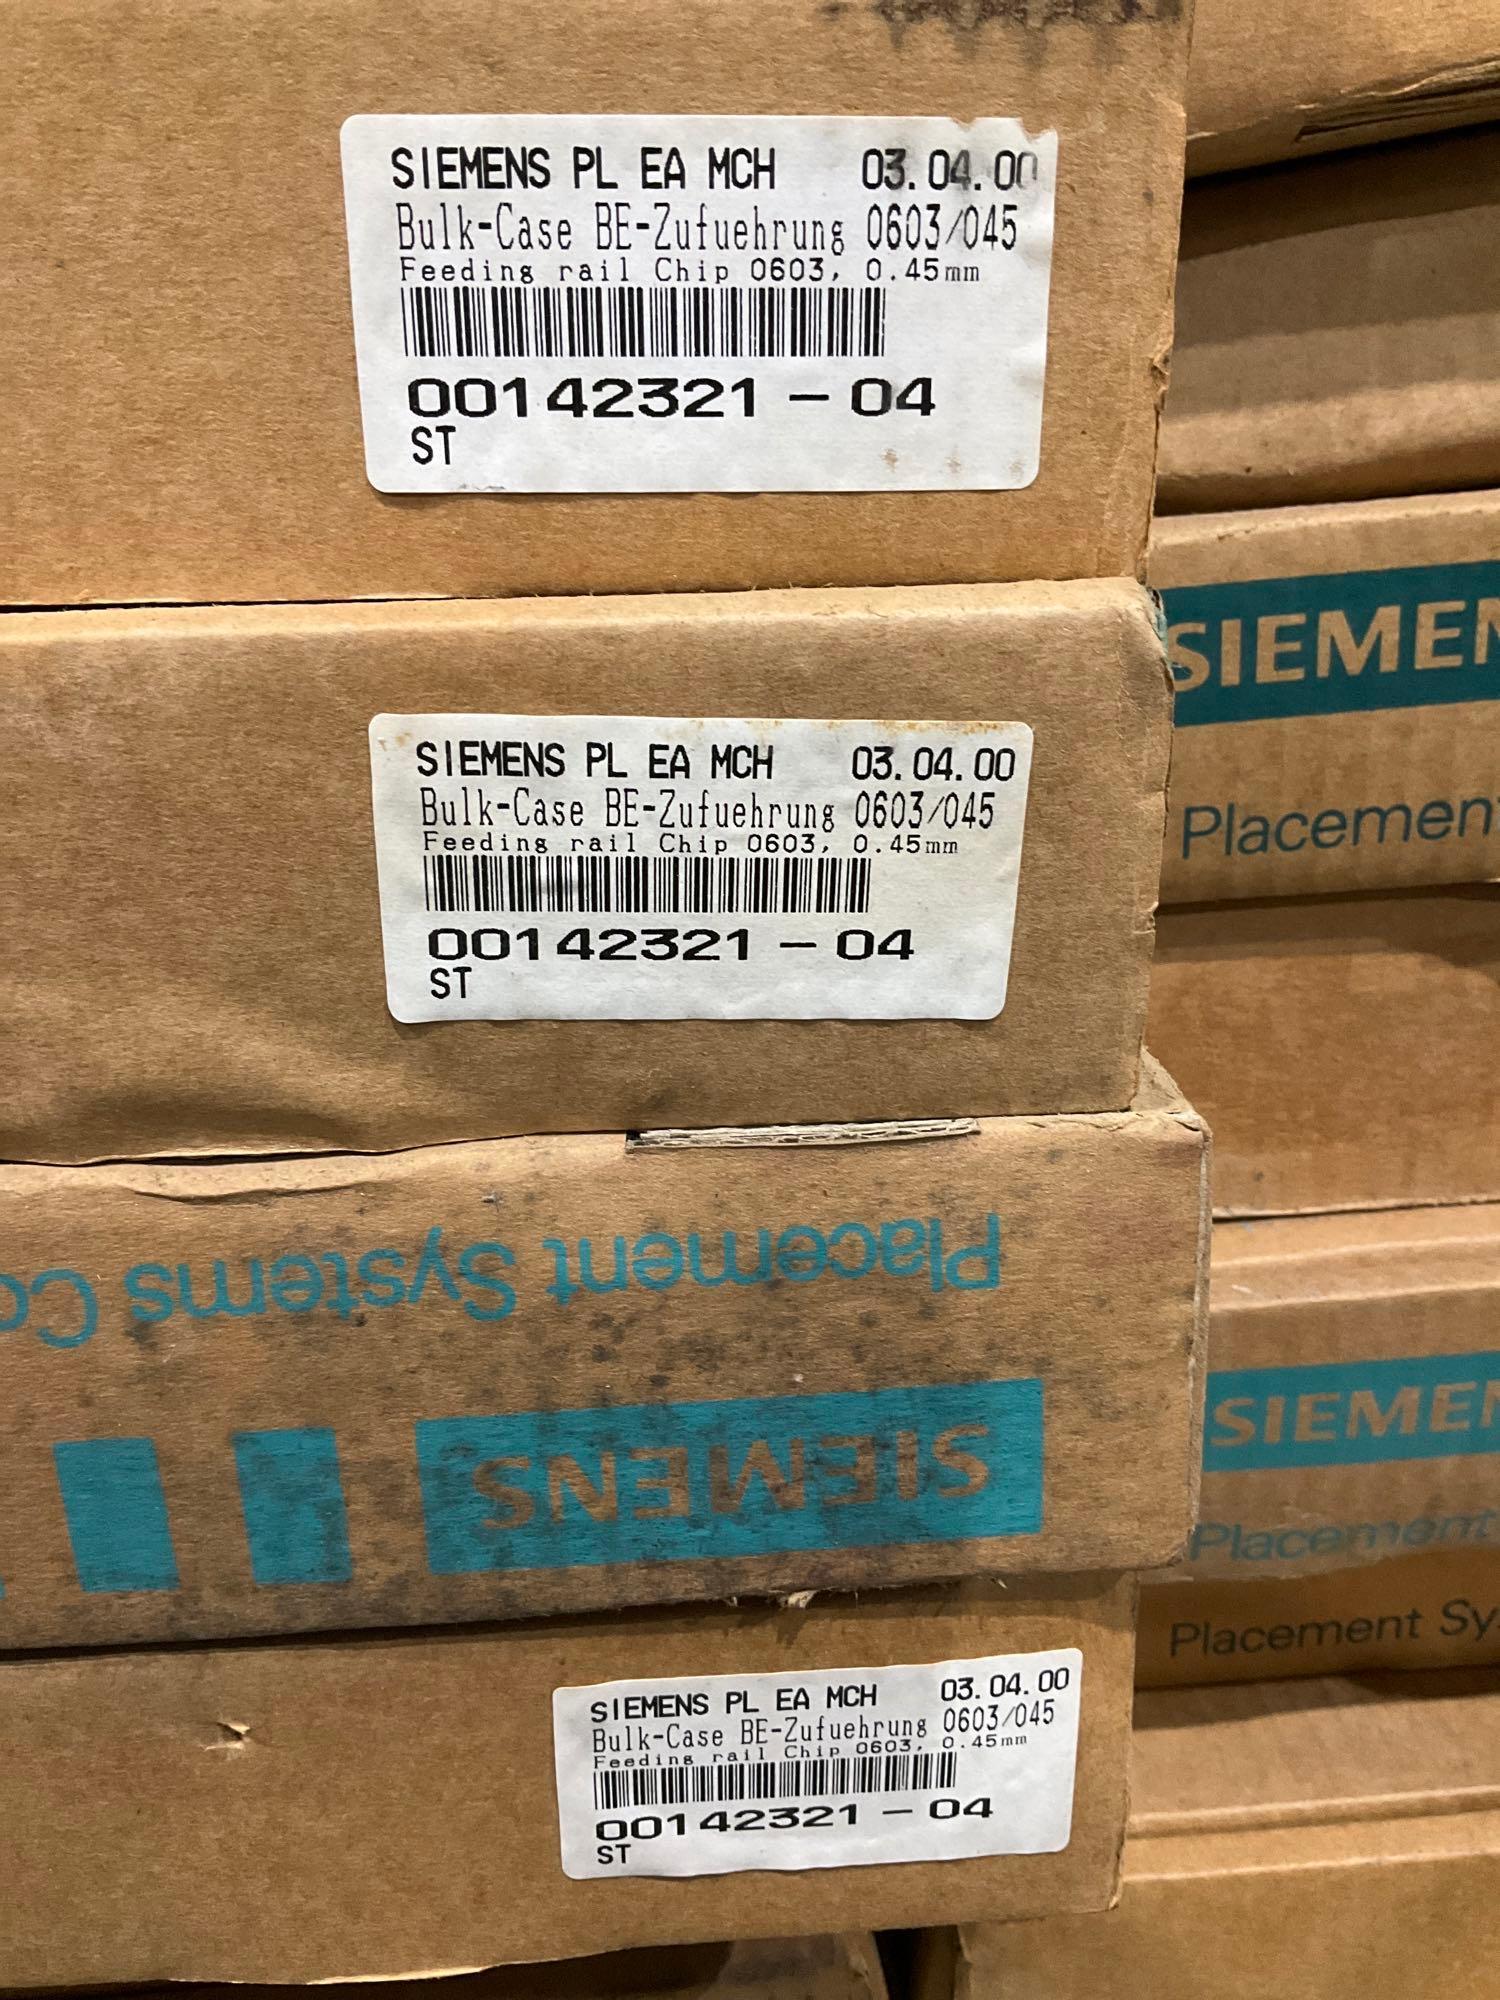 PALLET OF ASSORTED SIEMENS PLACEMENT SYSTEMS COMPONENTS, APPROX 45 BOXES